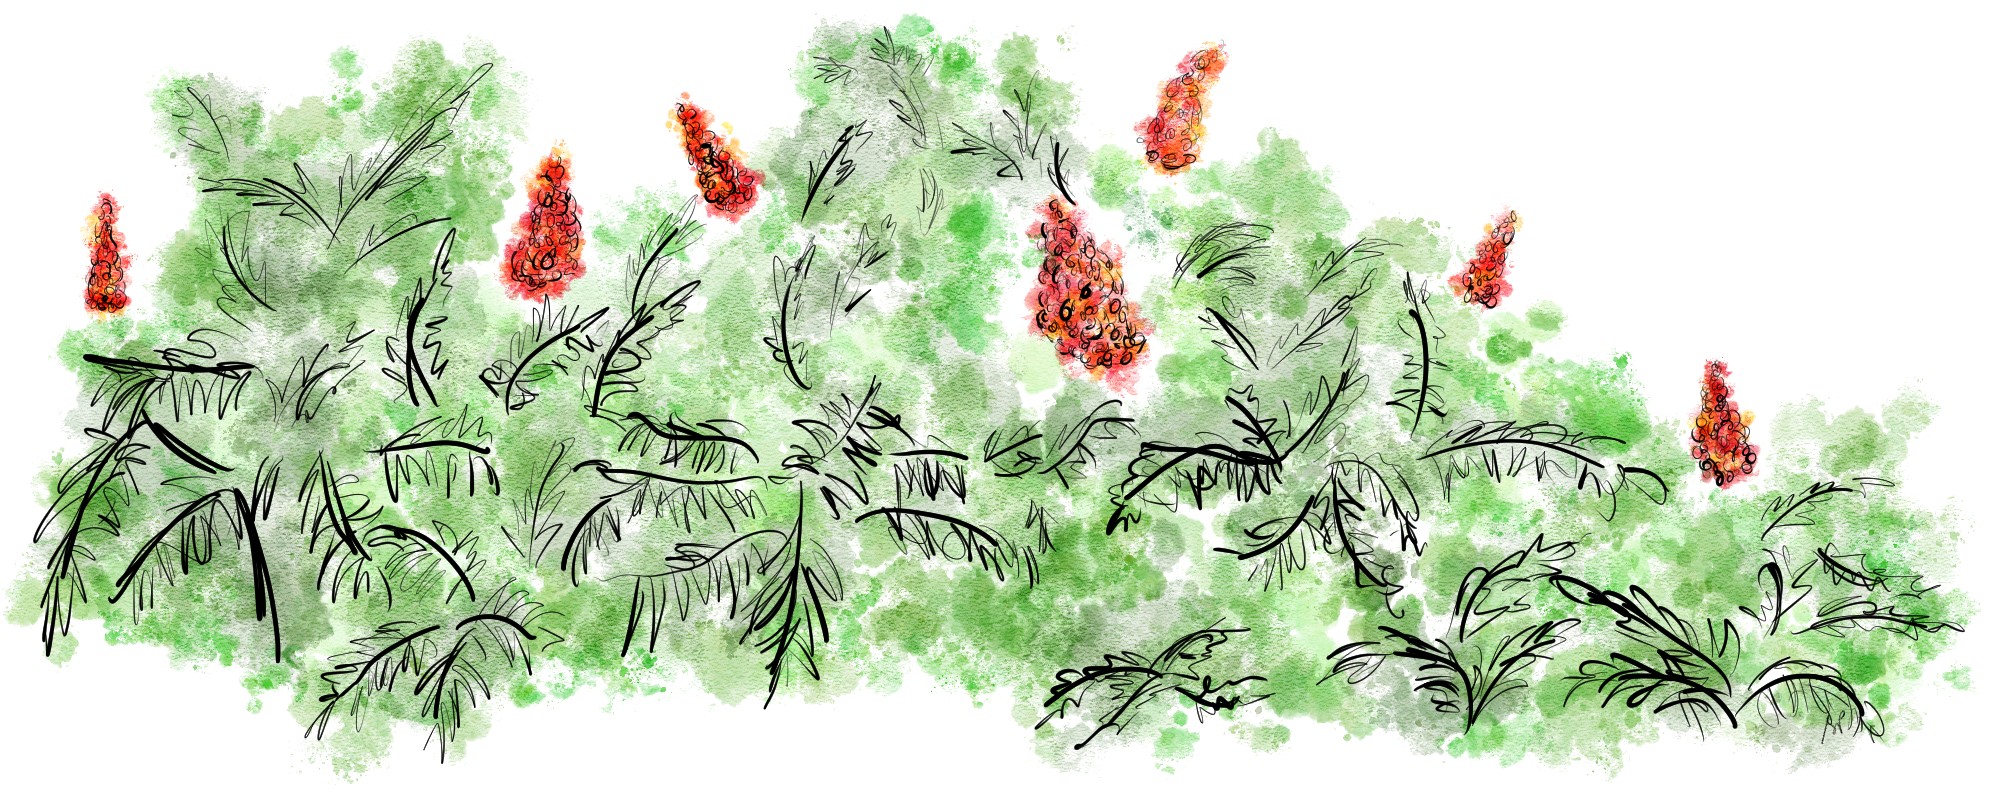 In a watercolour style. Illustration of sumac plants growing together. The leaves and bush are green, and the sumac petals are red with flecks of orange.